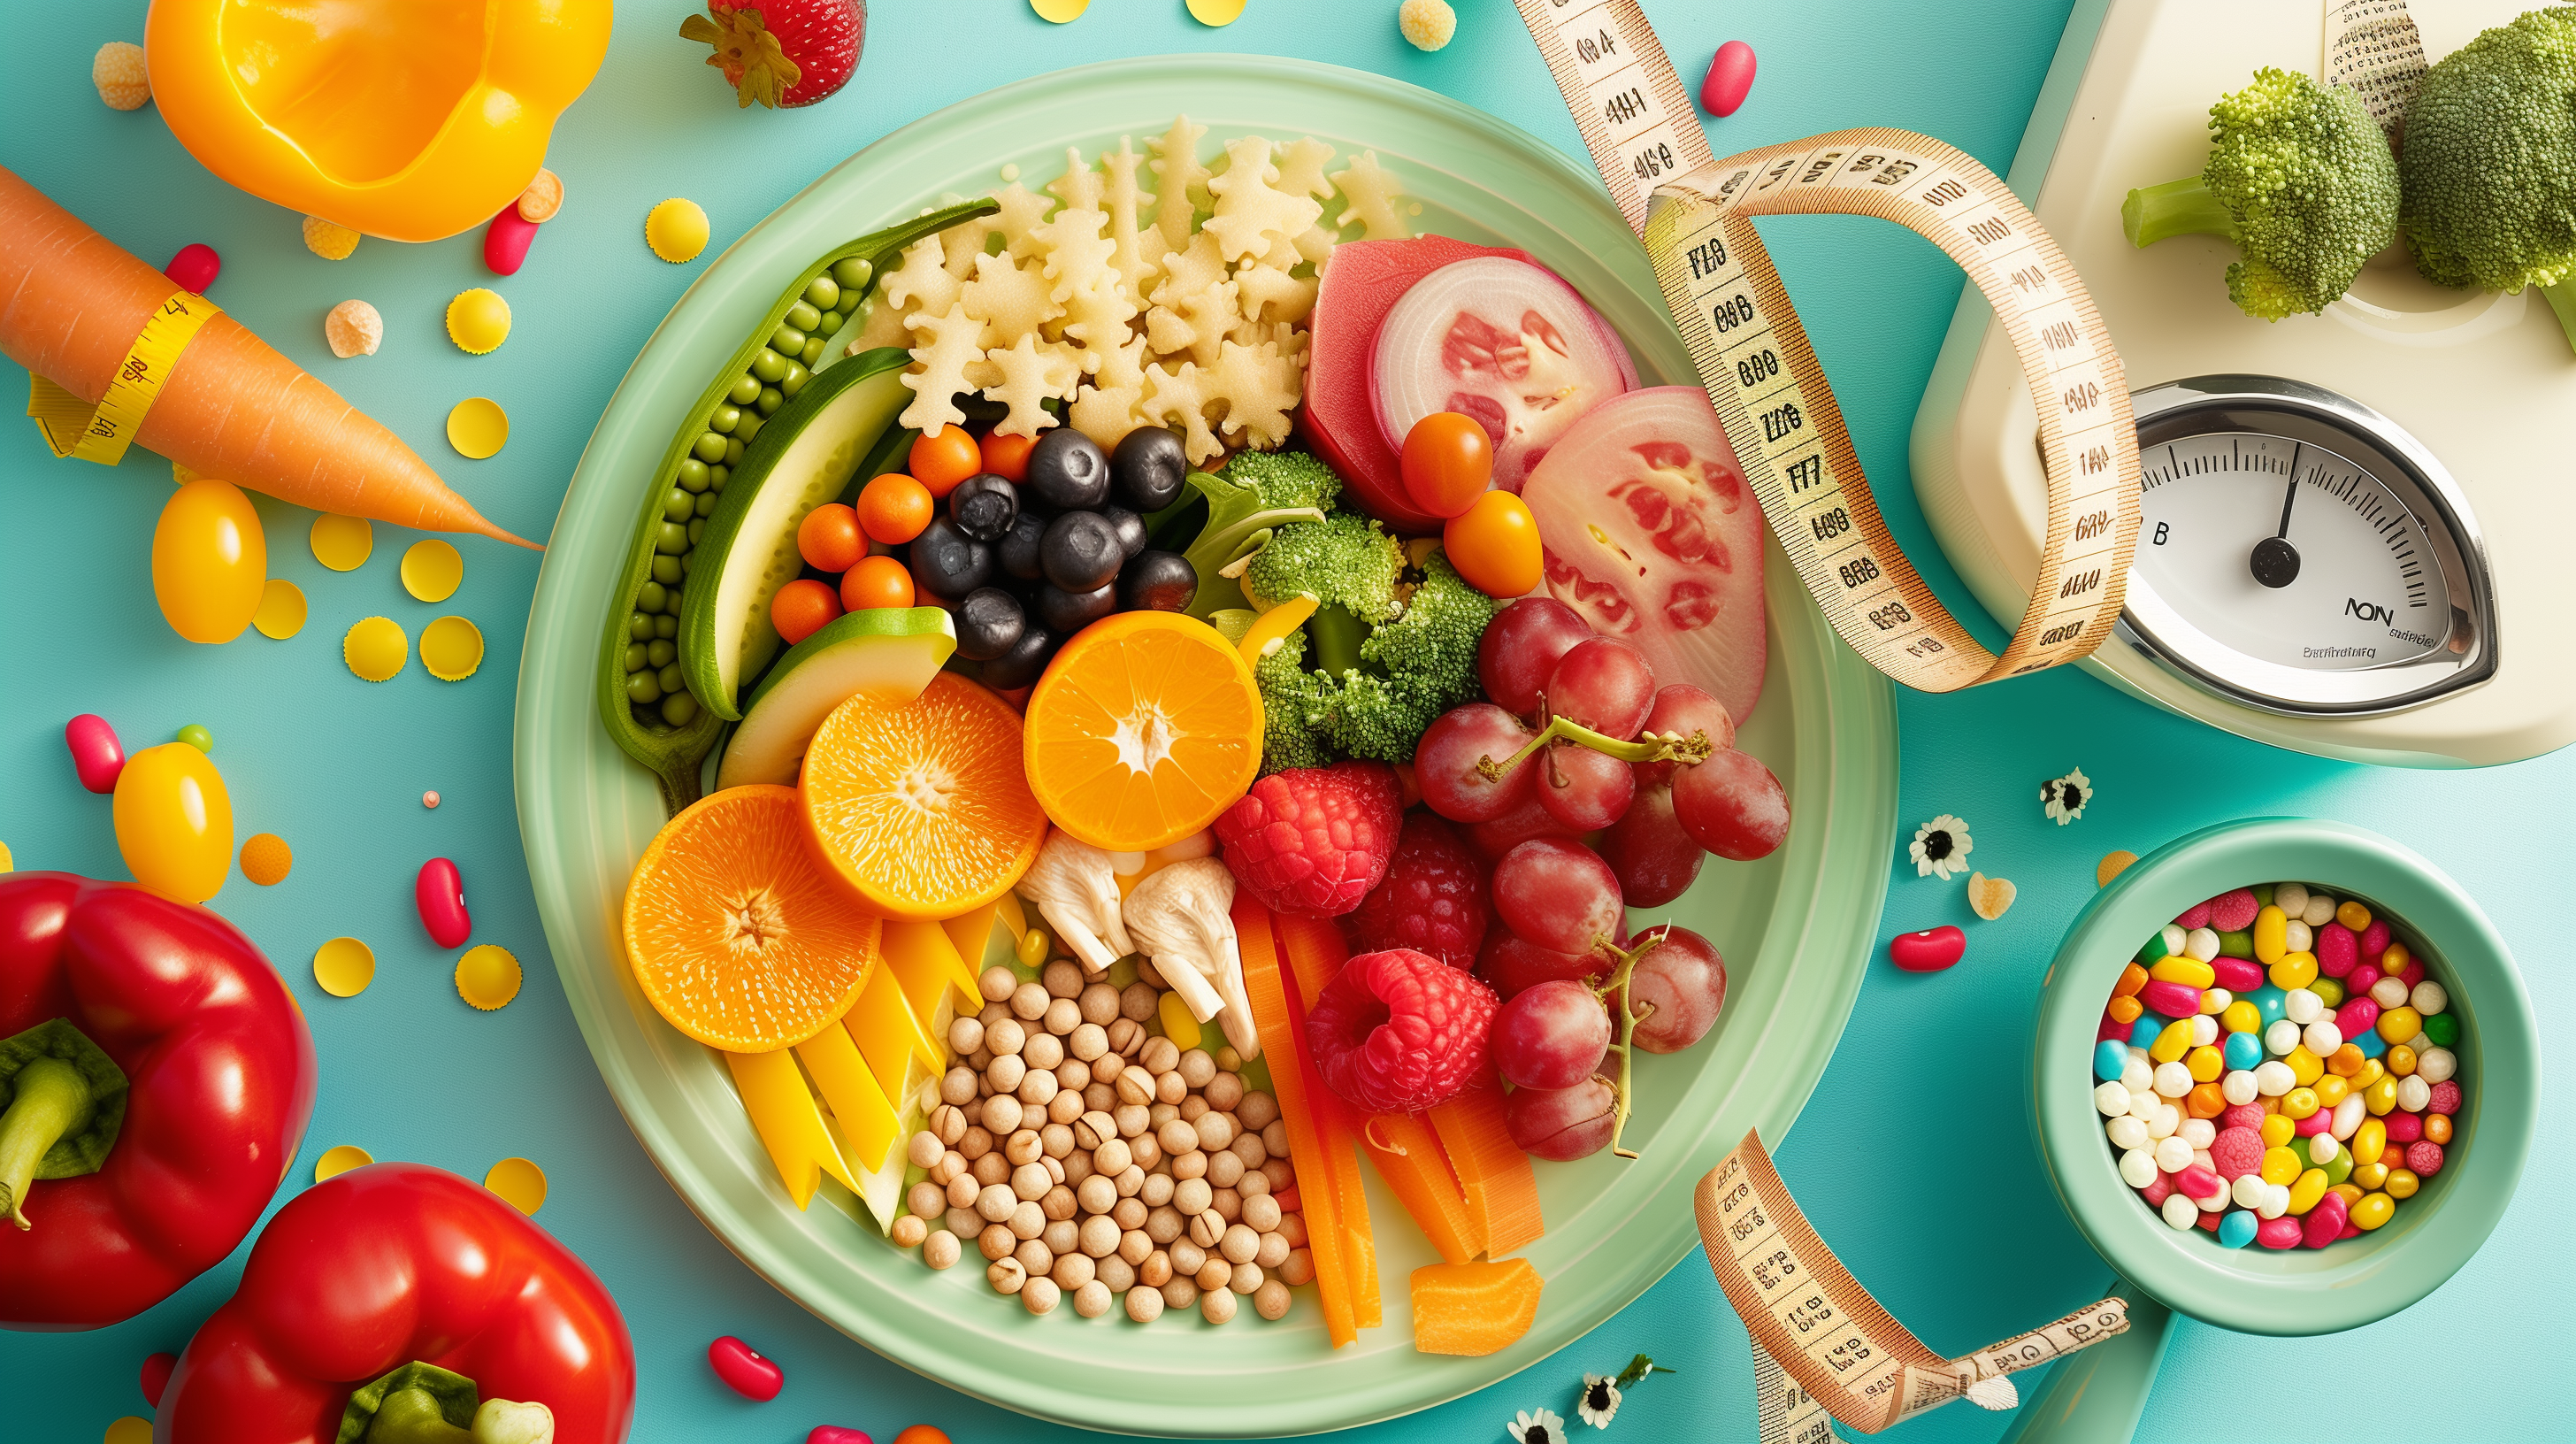 balanced plate divided into sections containing fruits, vegetables, whole grains, and lean proteins, beside a scale